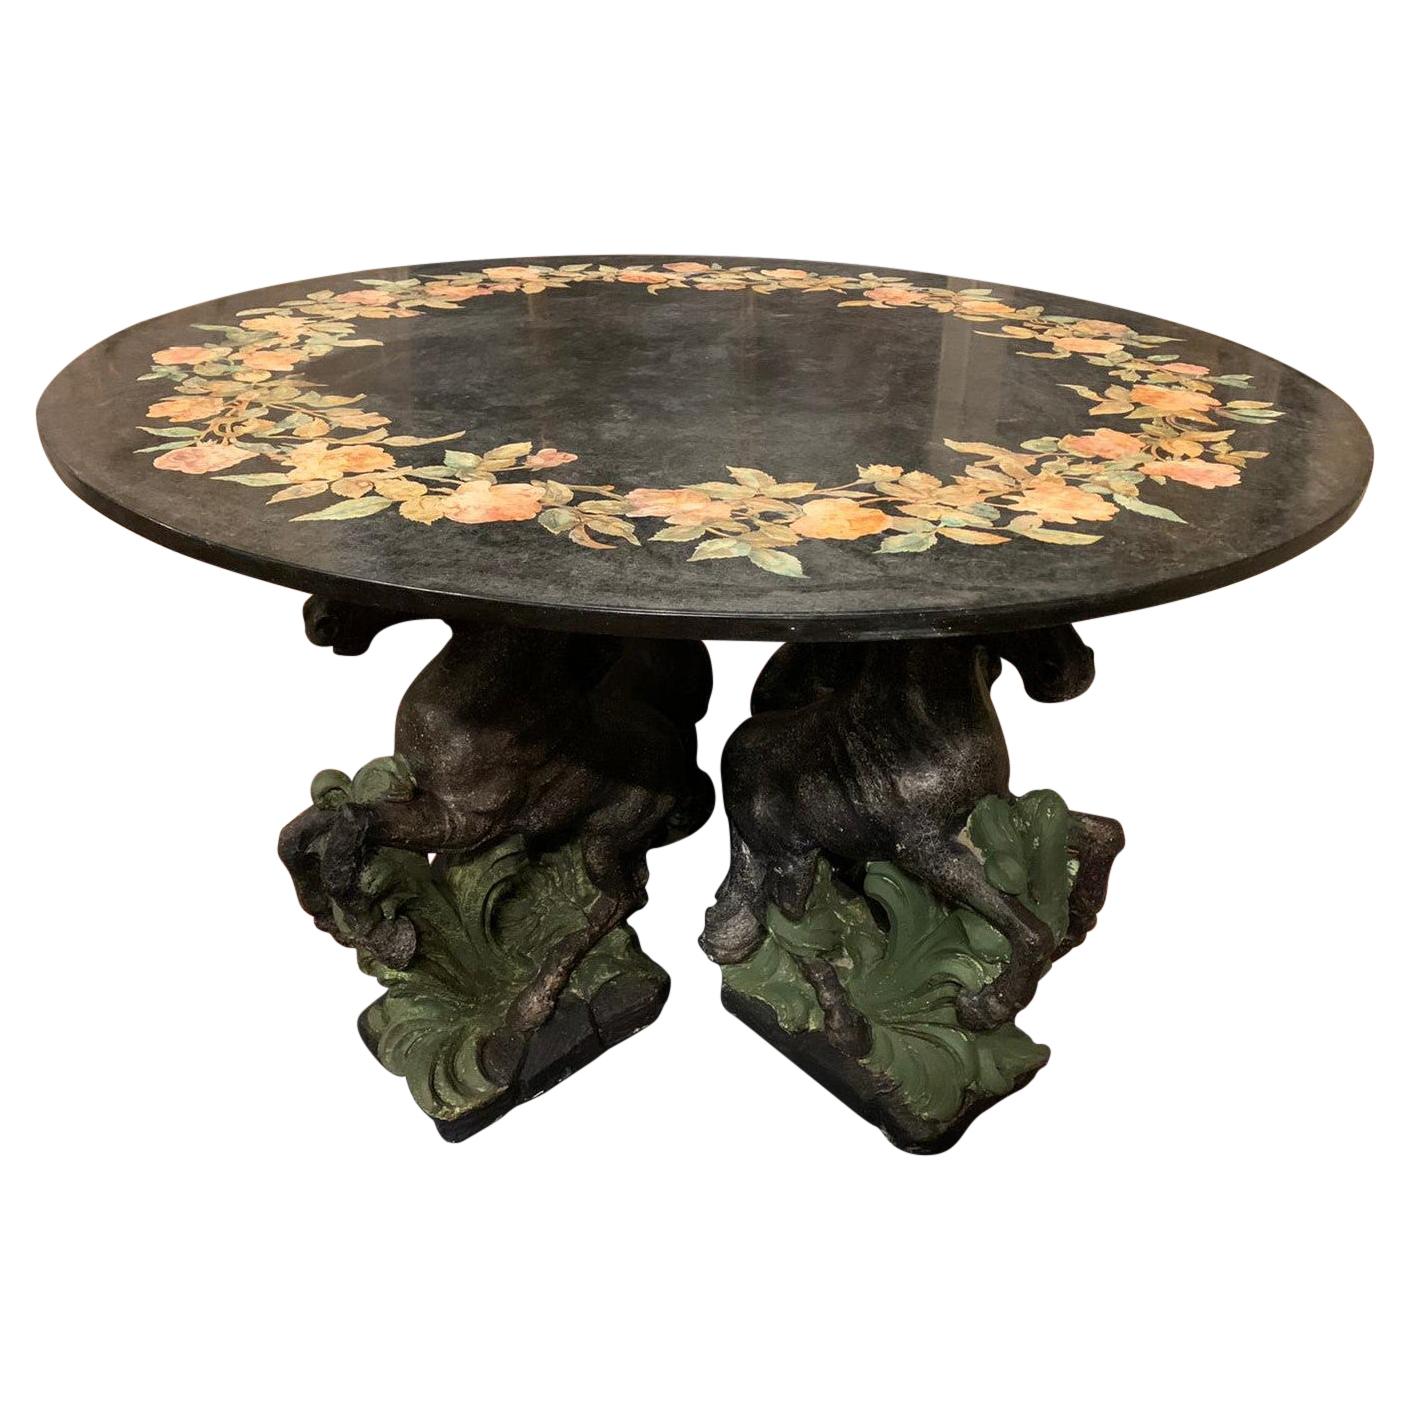 Vintage Black Scagliola Table with Four Sculpted Horses at the Base, '900 Italy